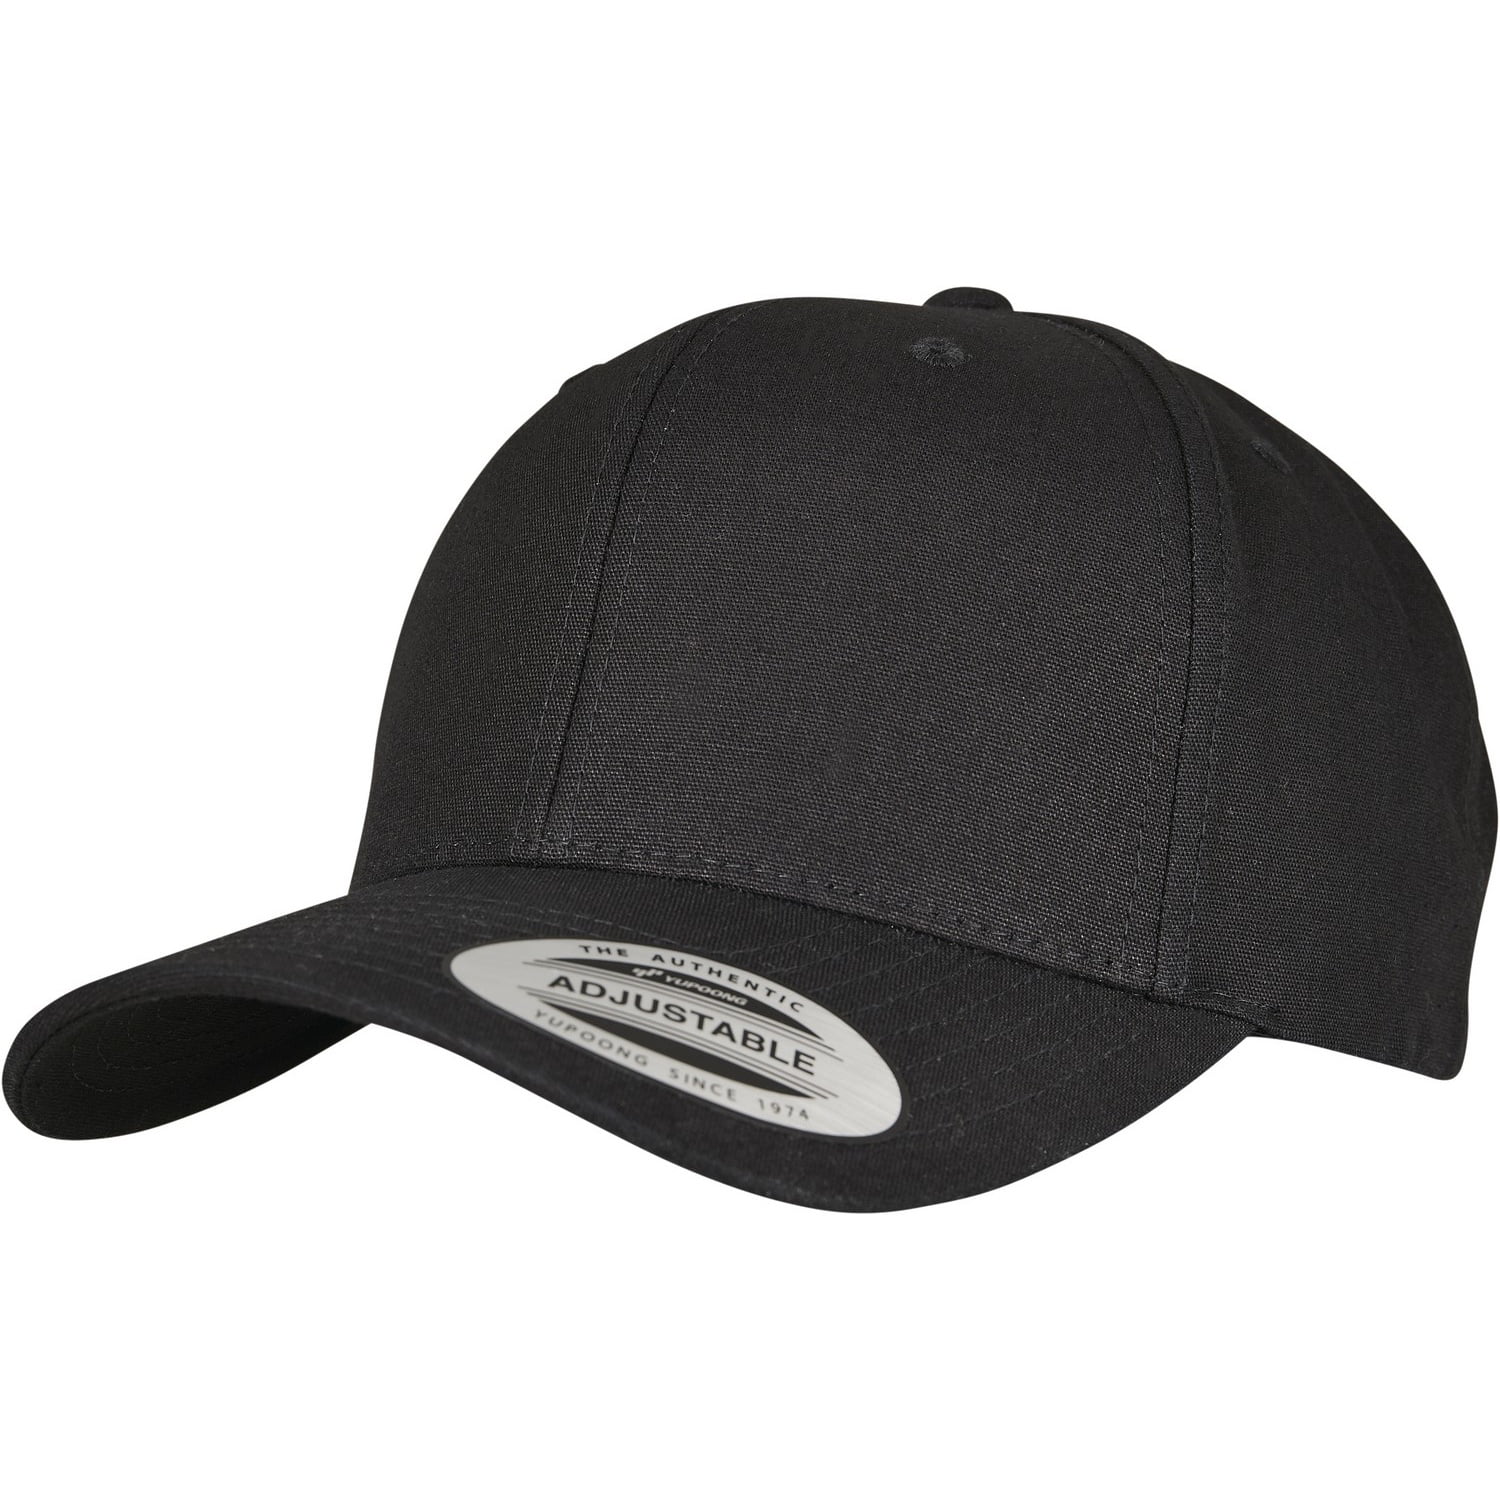 6 By Metal Curved Flexfit Cap Snap Panel Yupoong